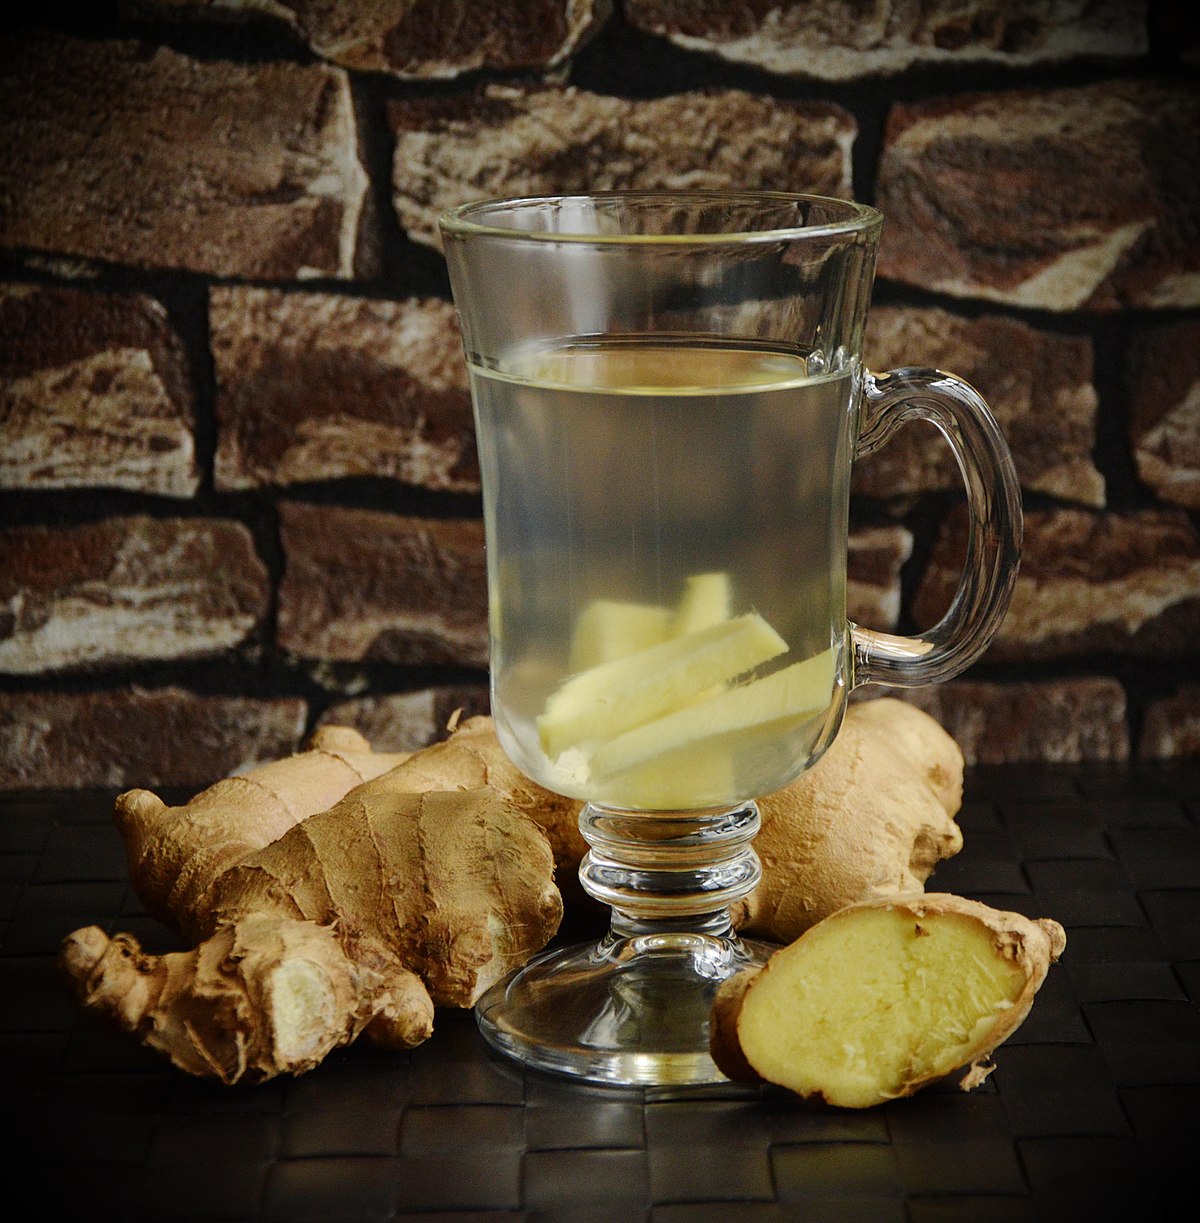 can ginger tea be used to reduce belly fat?